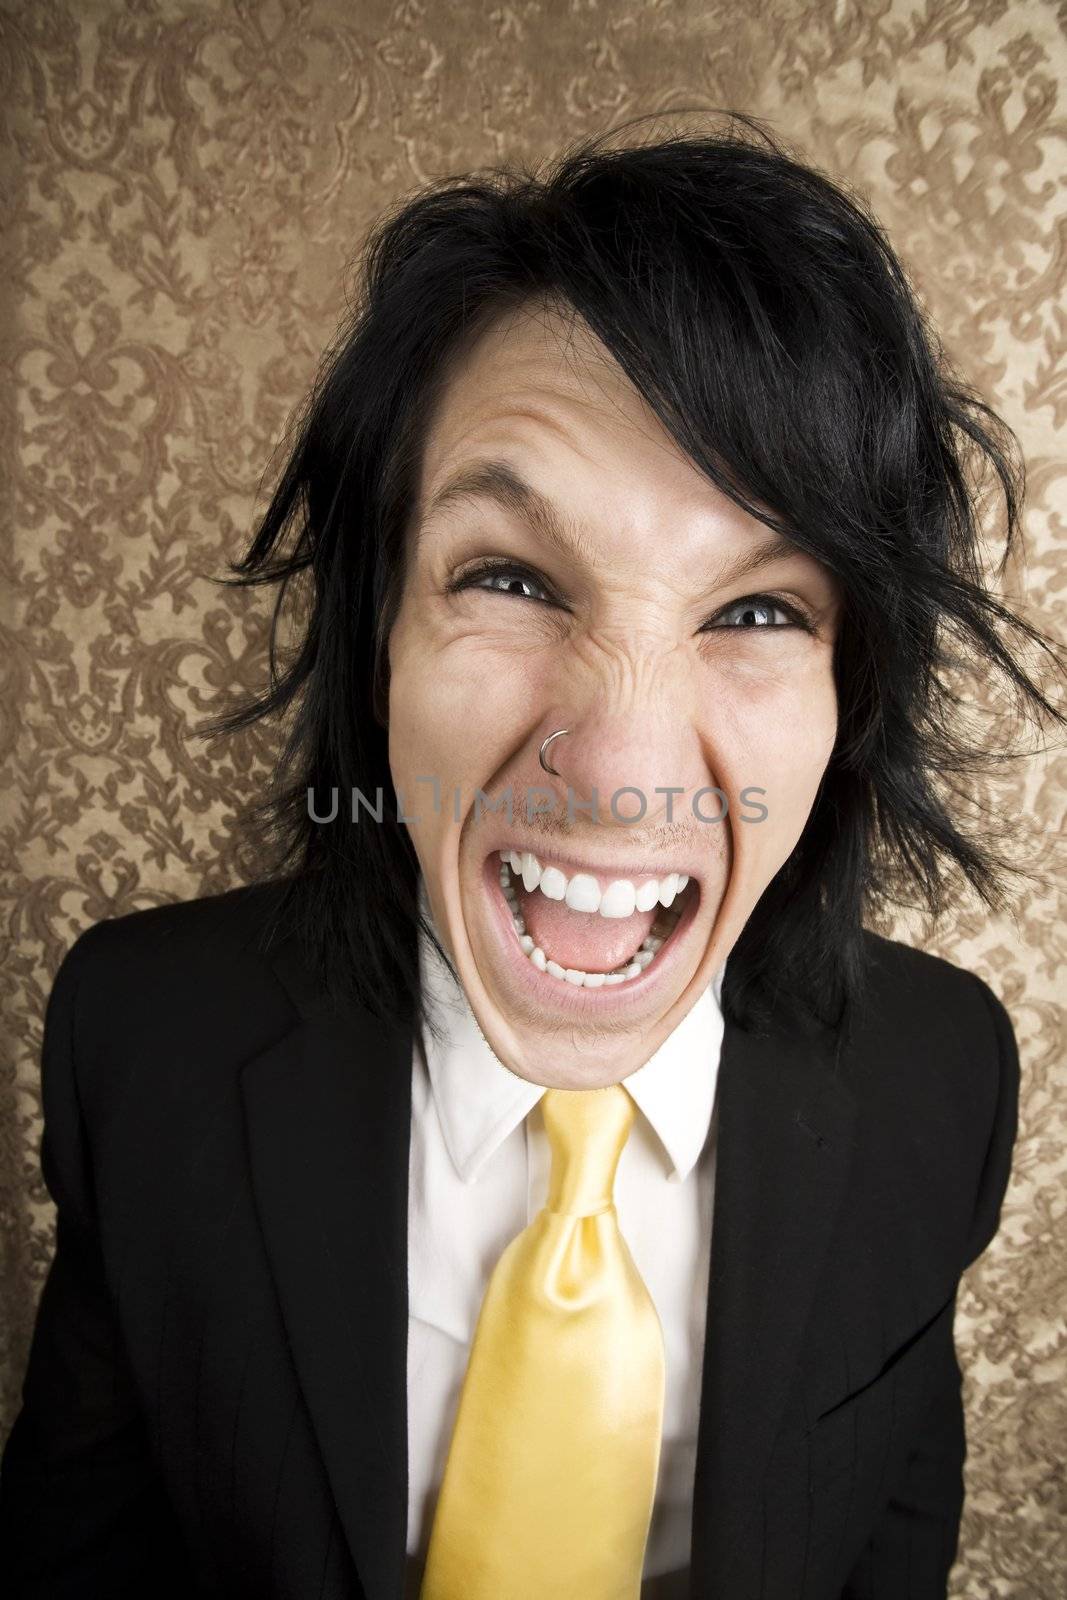 Screaming young man in a business suit and tie